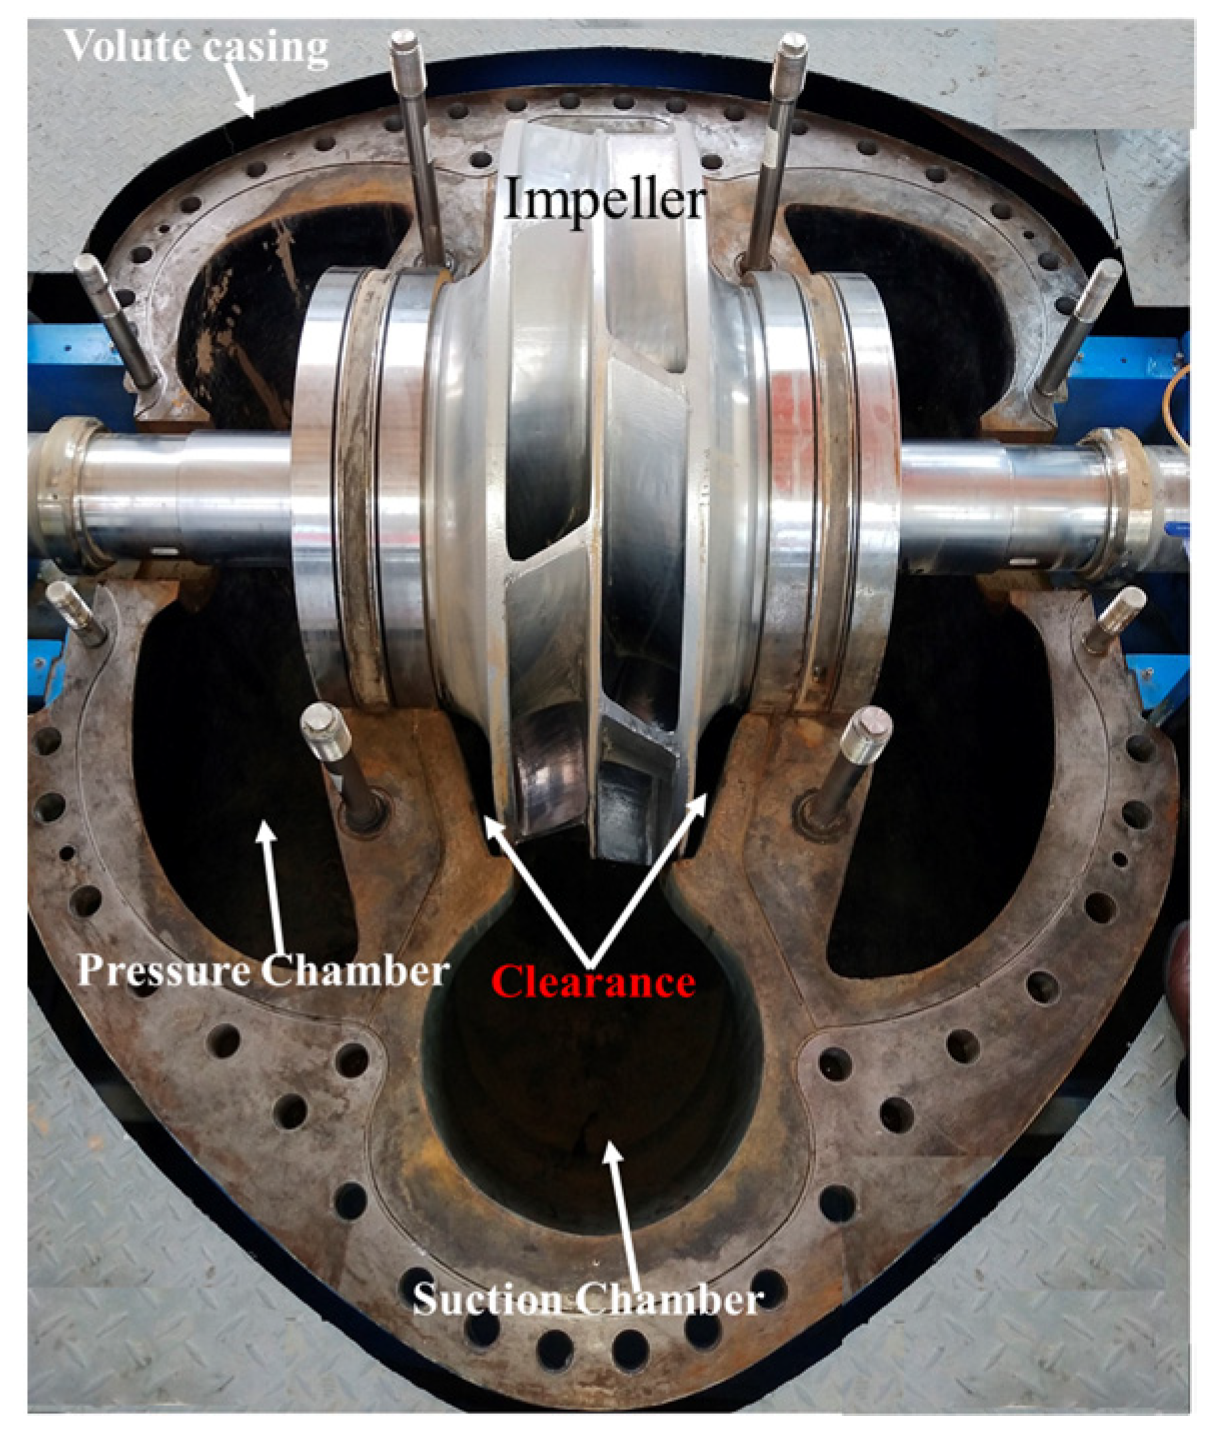 JMSE | Free Full-Text | Numerical Prediction of Erosion Based on the  Solid-Liquid Two-Phase Flow in a Double-Suction Centrifugal Pump